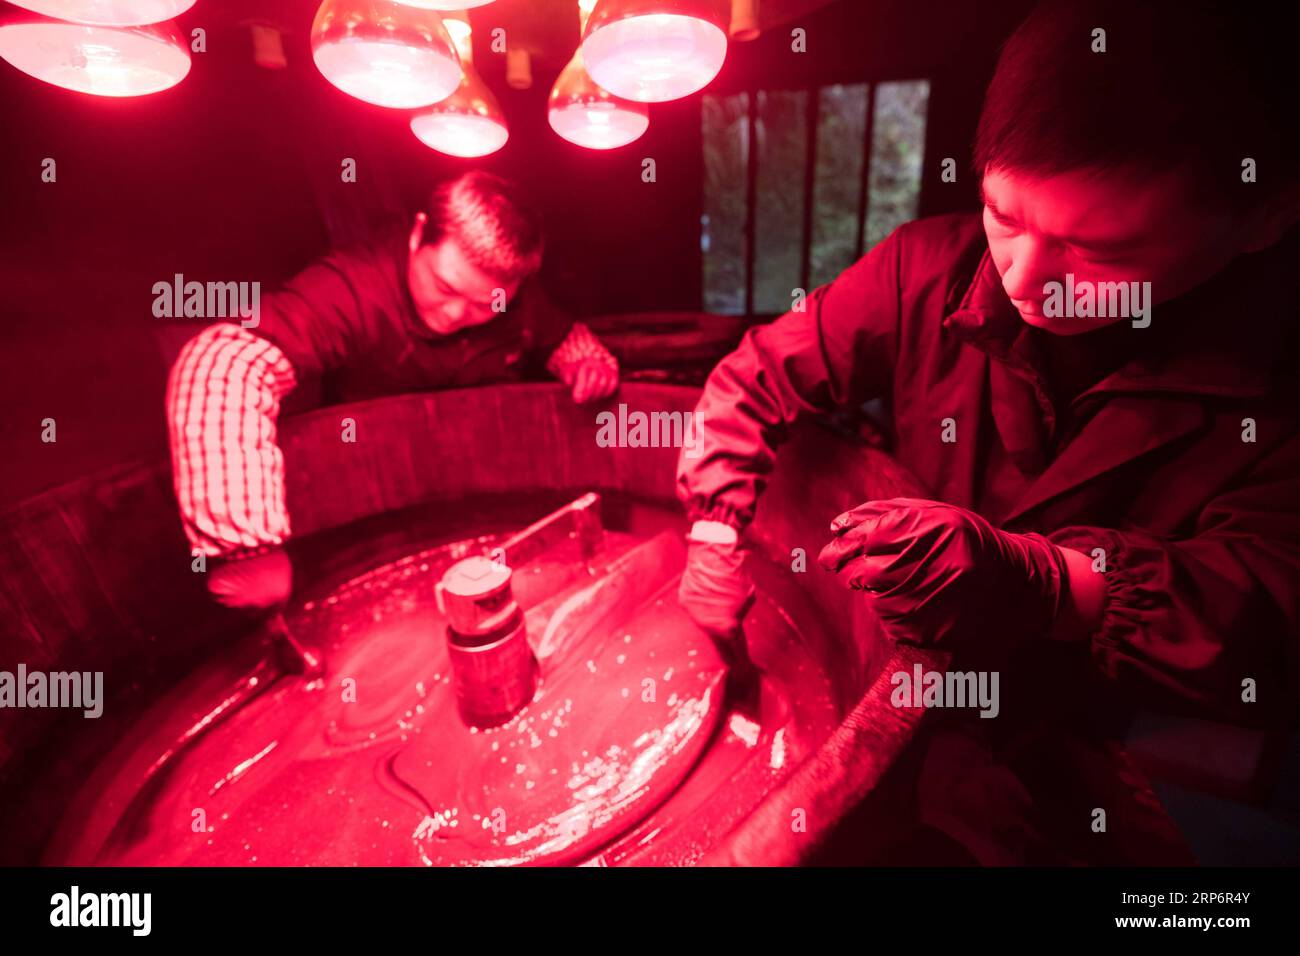 (190119) -- LONGQUAN, Jan. 19, 2019 (Xinhua) -- Wu Rongqiang (R) and his apprentice make lacquer at his studio in Niutouling Village, Longquan City of east China s Zhejiang Province, Jan. 15, 2019. Wu Rongqiang, a Longquan native aged 45, started exploring traditional lacquer art since 2012. In 2017, he moved his family to an old house deep in the mountains in Longquan in order to do more experiments in lacquer undisturbed. He uses lacquer to repair broken porcelain and to create lacquerware. Also, he experiments on the production of various lacquers. I feel so pleased to return to my hometown Stock Photo